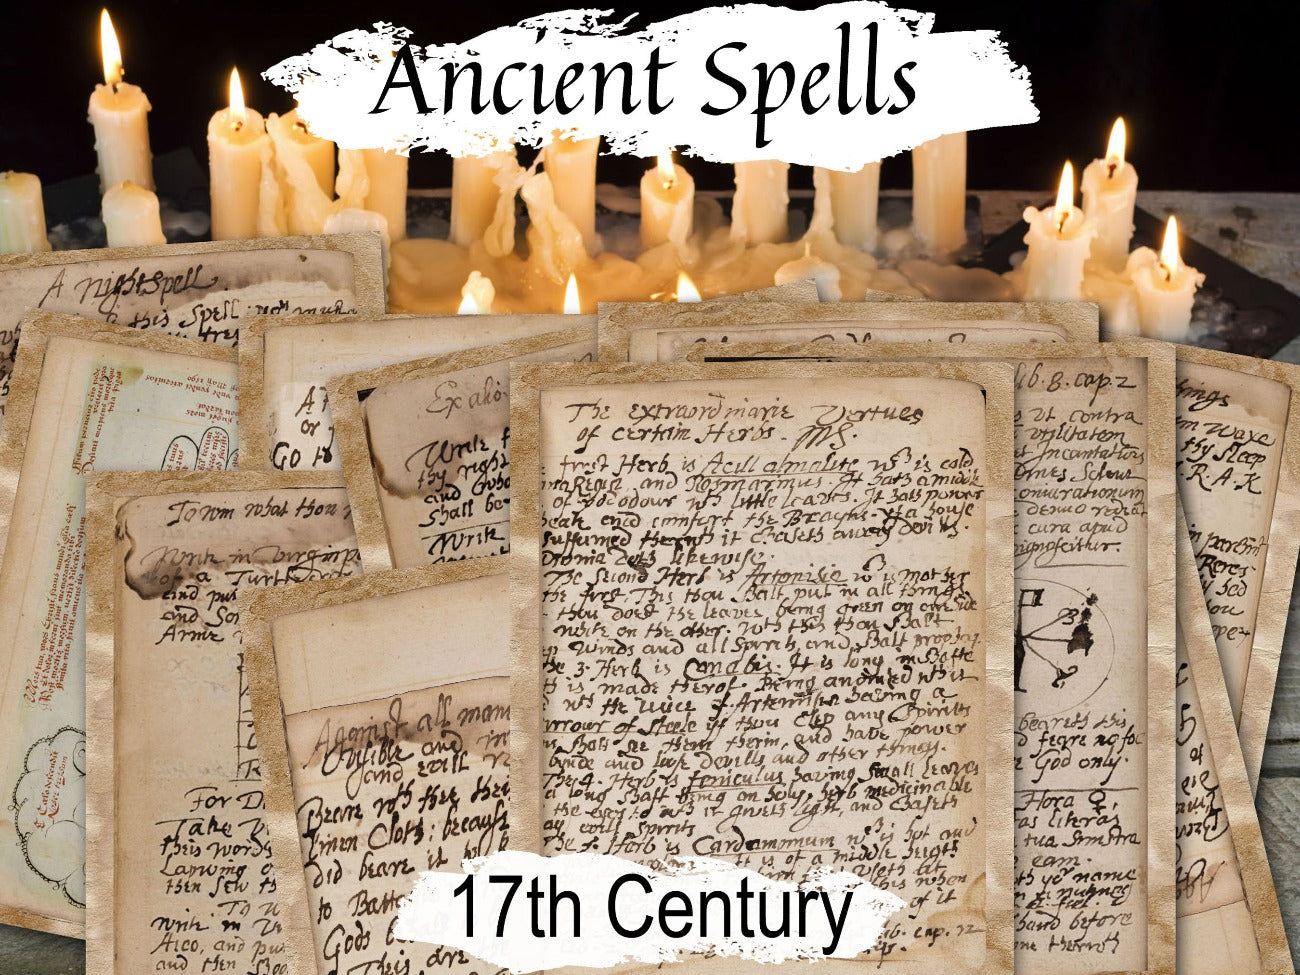 ANCIENT SPELLS Bundle, 17th Century Witchcraft, 25 Pages of Old Witch Handwritten Spells with Translations, Genuine Witchcraft Spells - Morgana Magick Spell